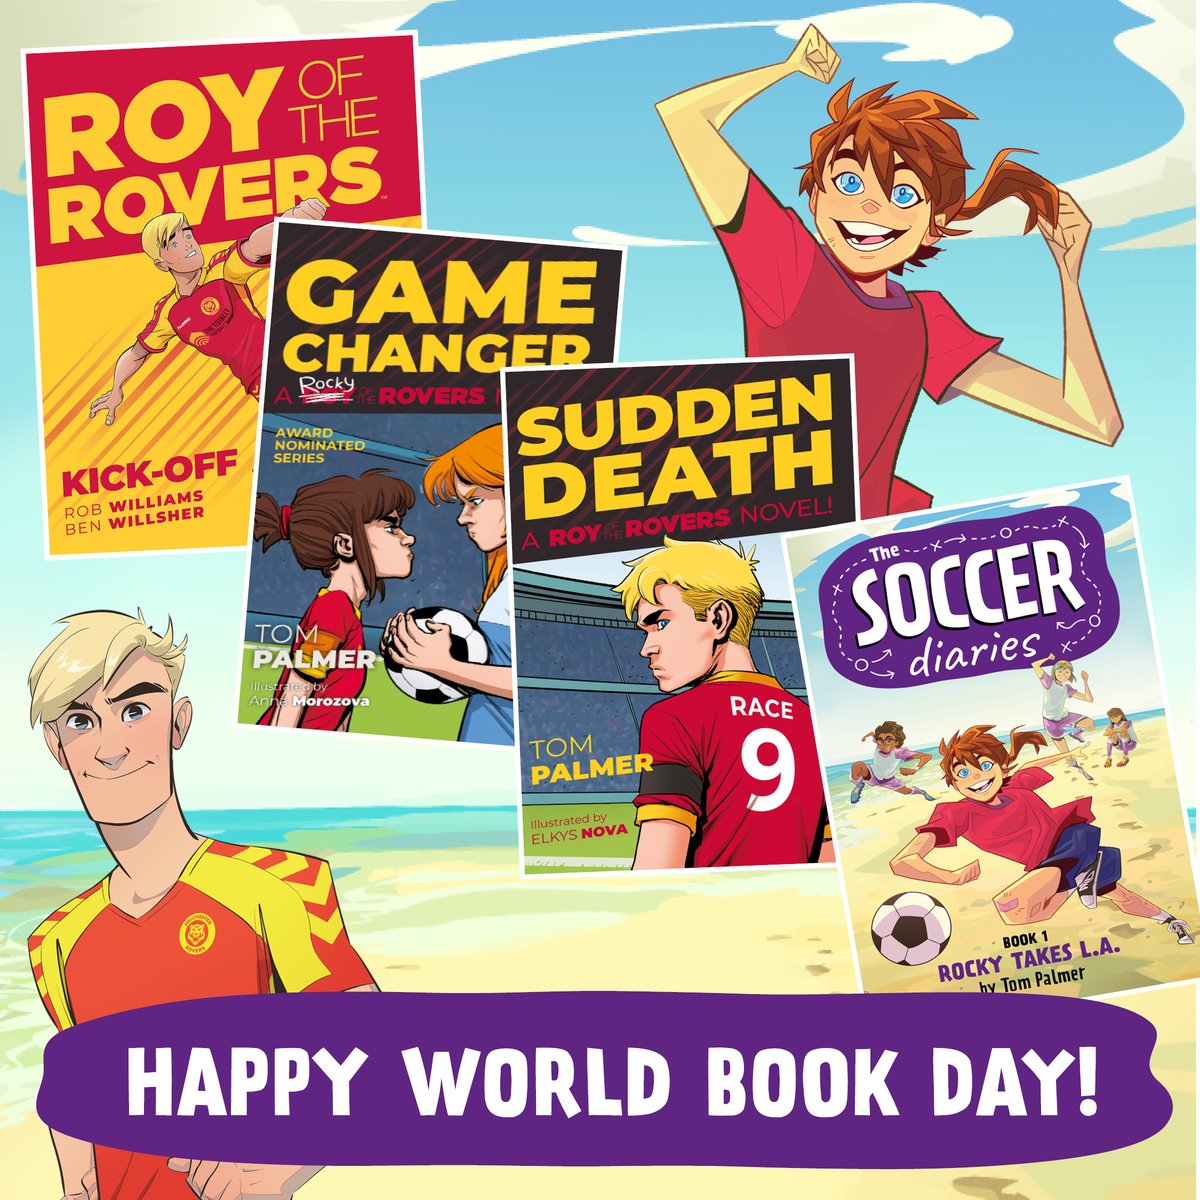 Happy #WorldBookDay! 📚 No matter what you're reading (or whoever you're dressed as) it's so important to find stories you love, characters you adore, and adventures you can't wait to go on! We hope #TheSoccerDiaries and #RoyOfTheRovers have been part of your reading journey!